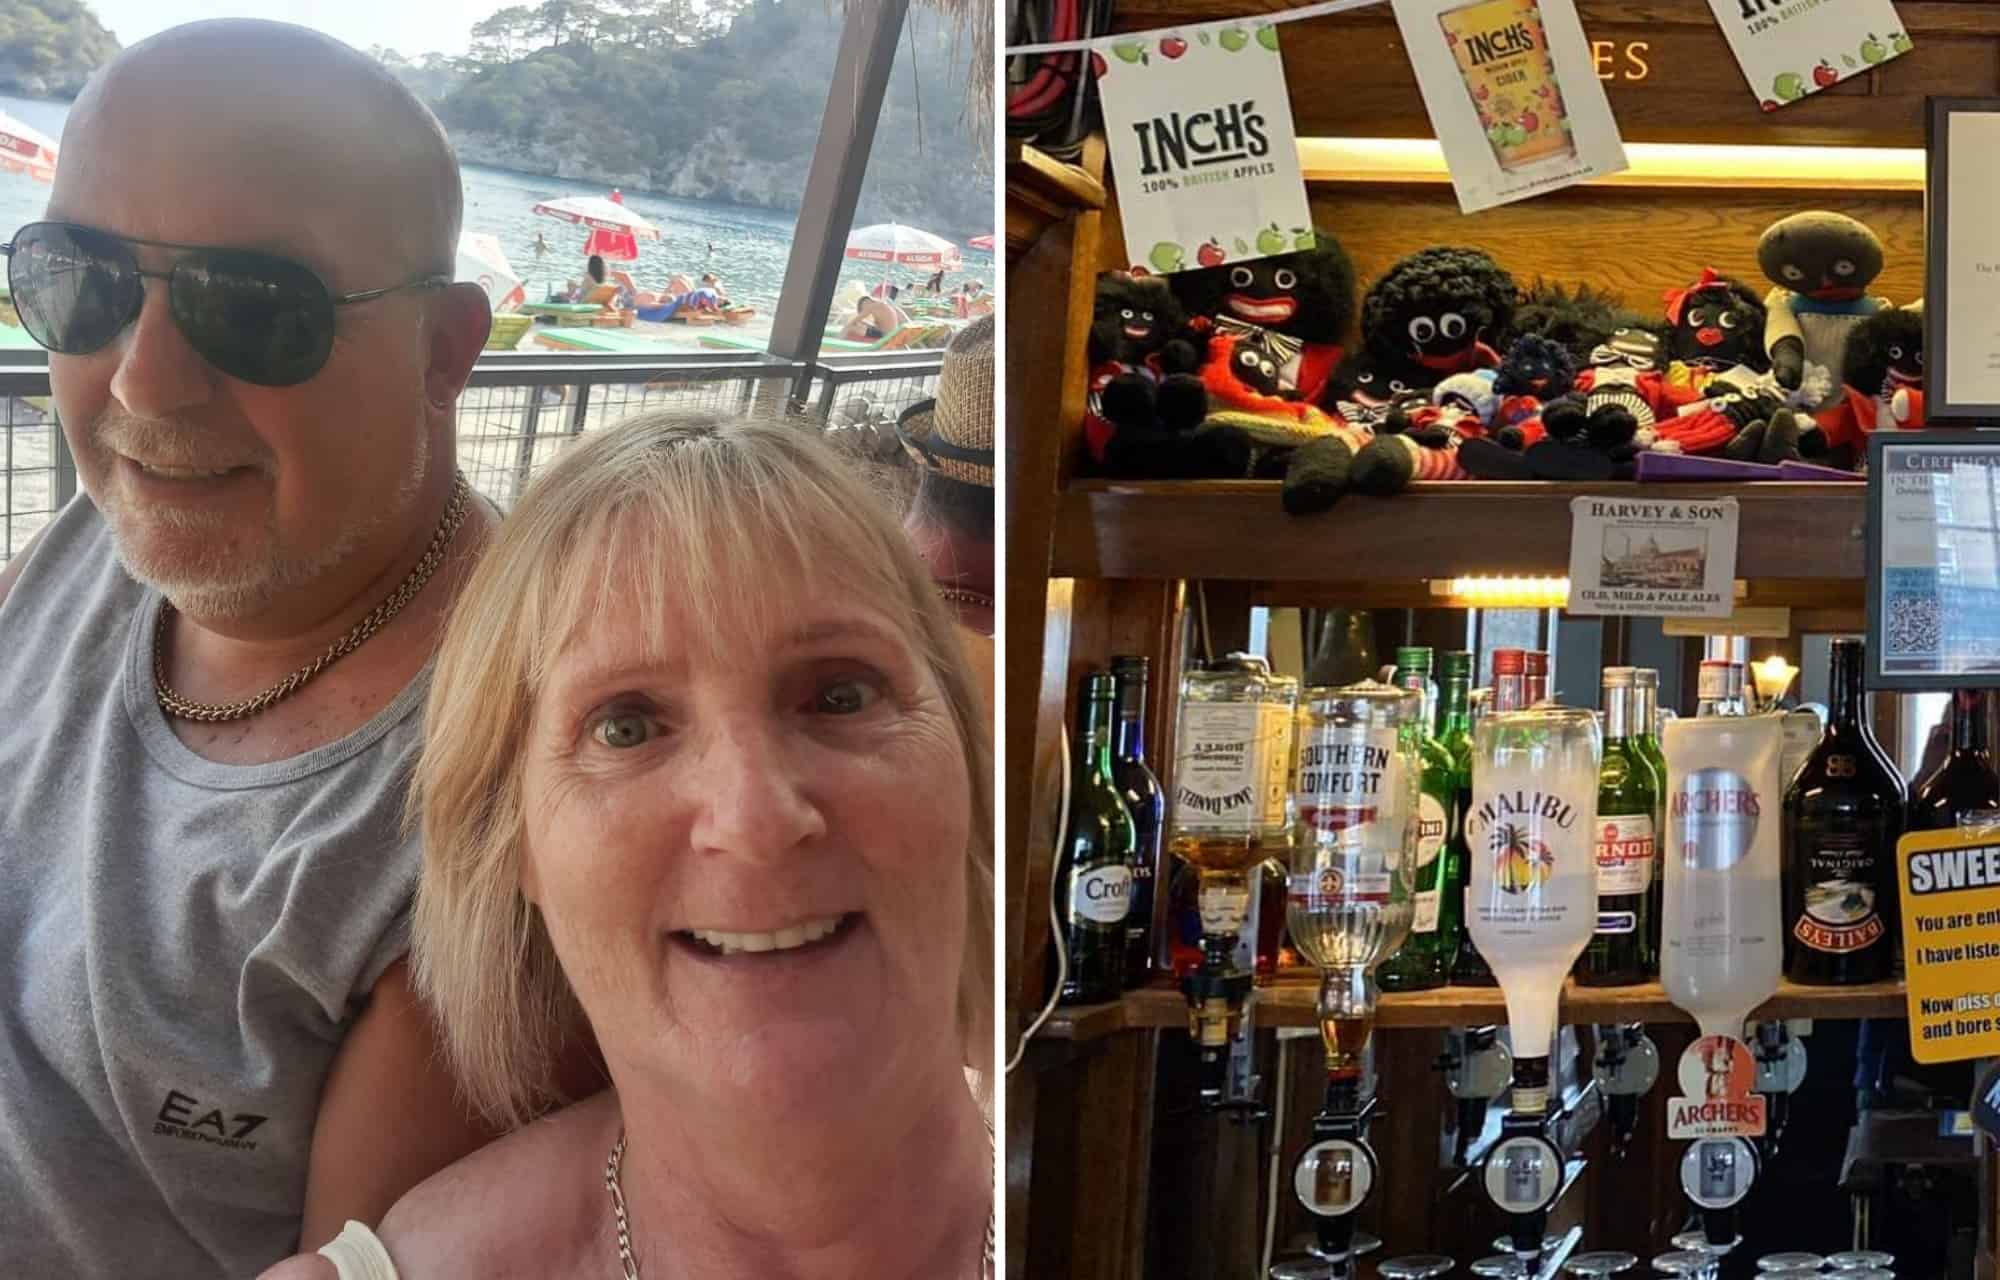 Essex pub landlady says husband is no Britain First supporter – despite being pictured wearing the T-shirt